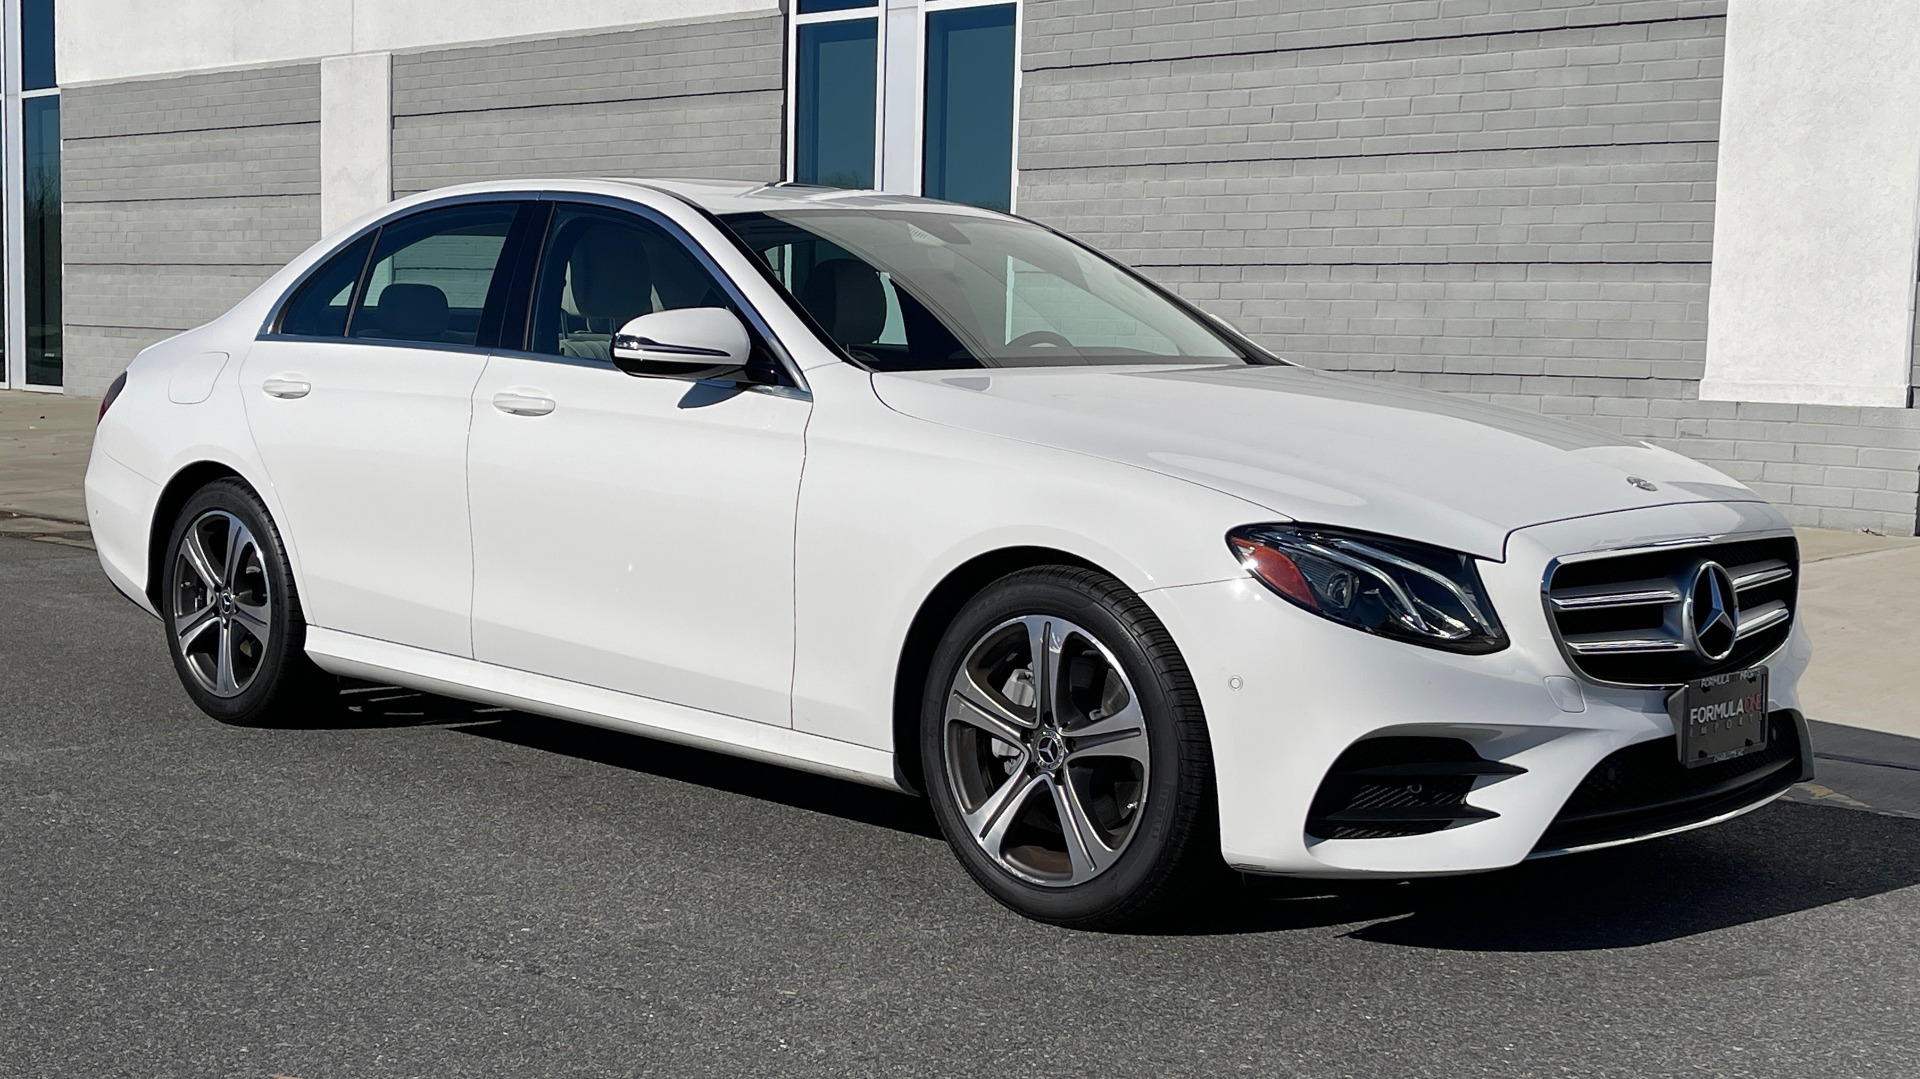 Used 2018 Mercedes-Benz E-CLASS E 300 2.0L SEDAN / RWD / 9-SPD AUTO / BLIND SPOT ASSIST / REARVIEW for sale $41,999 at Formula Imports in Charlotte NC 28227 5